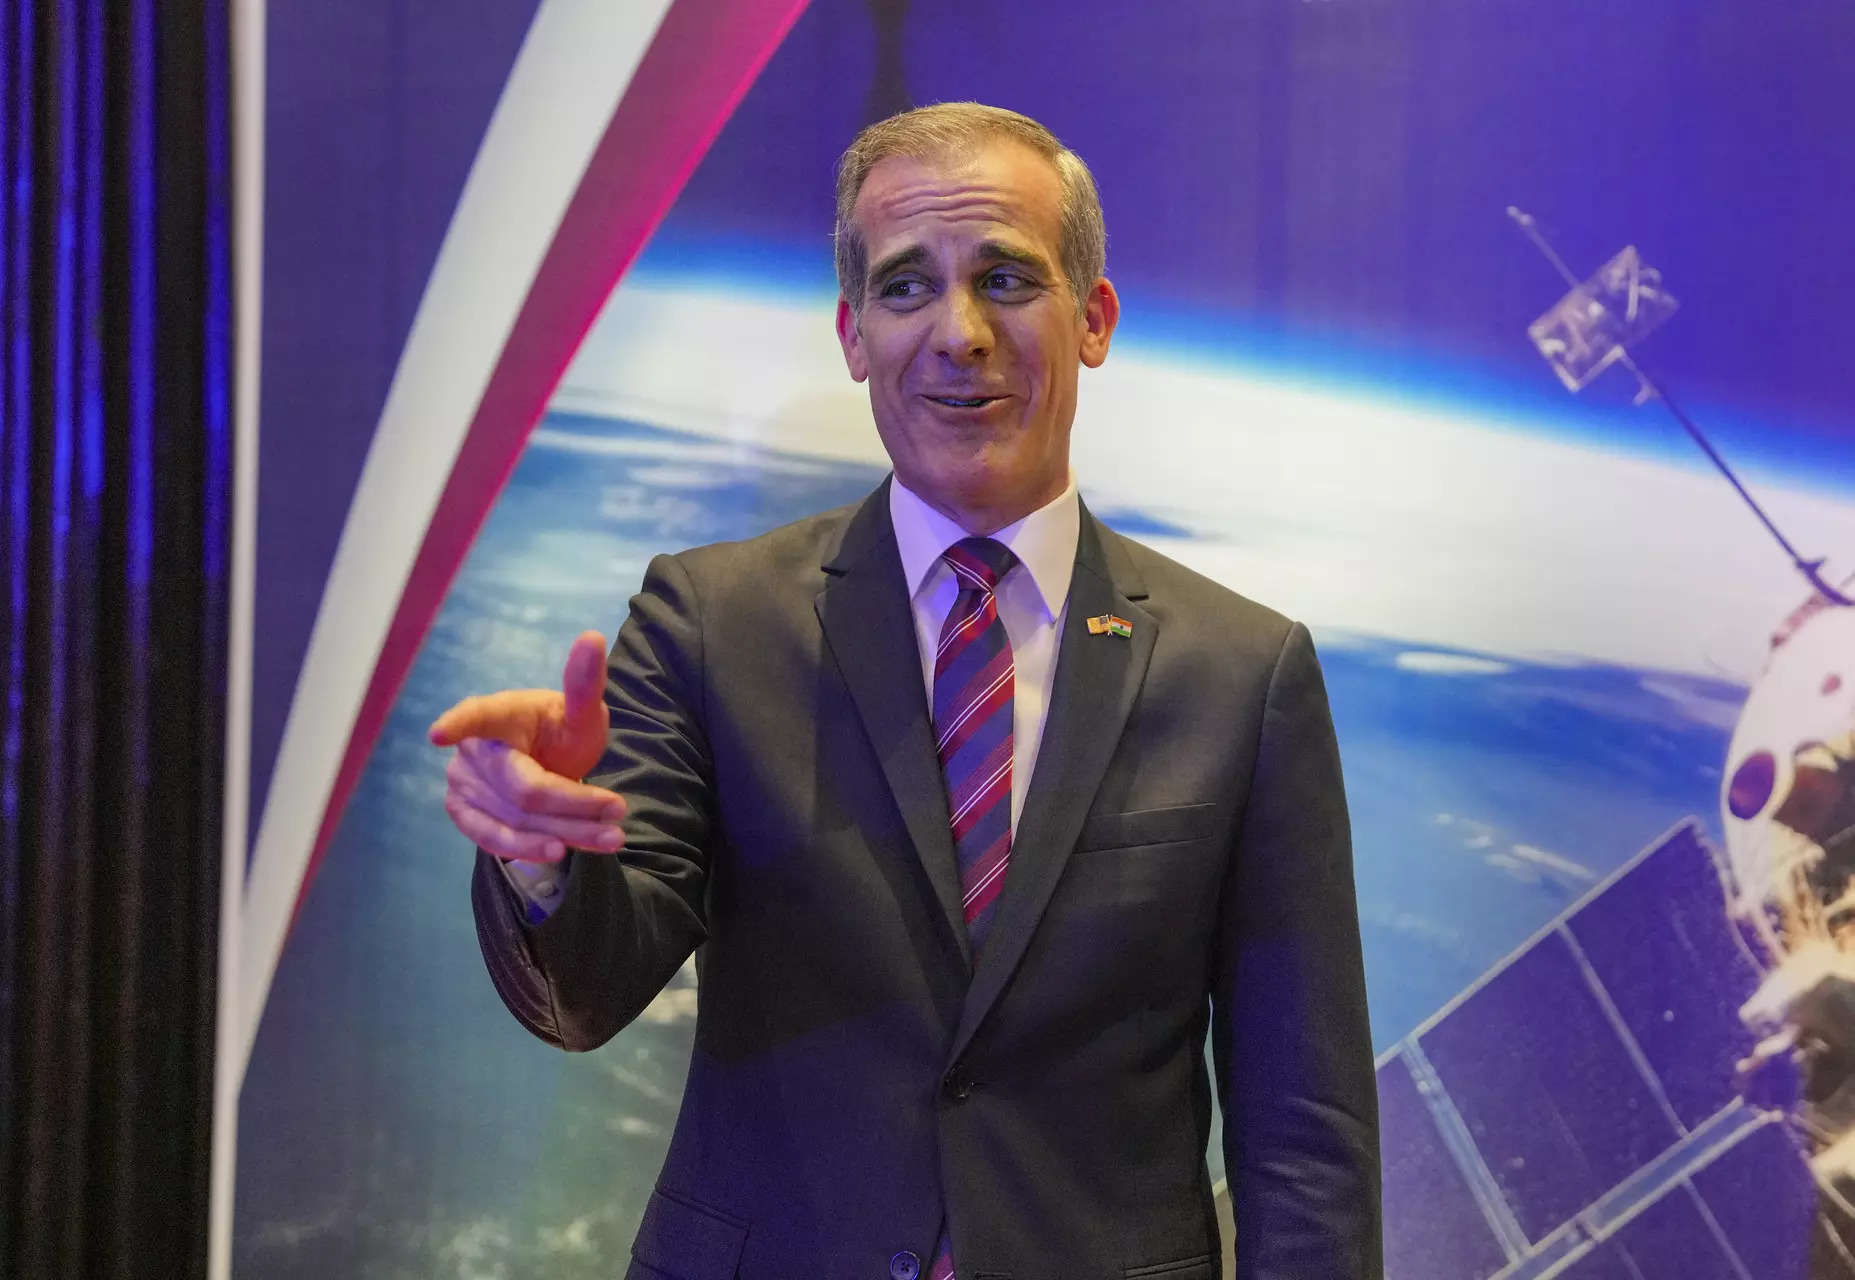 US trust in India led to approval of selling America's most exquisite jet engine technology to India, says US envoy Garcetti 